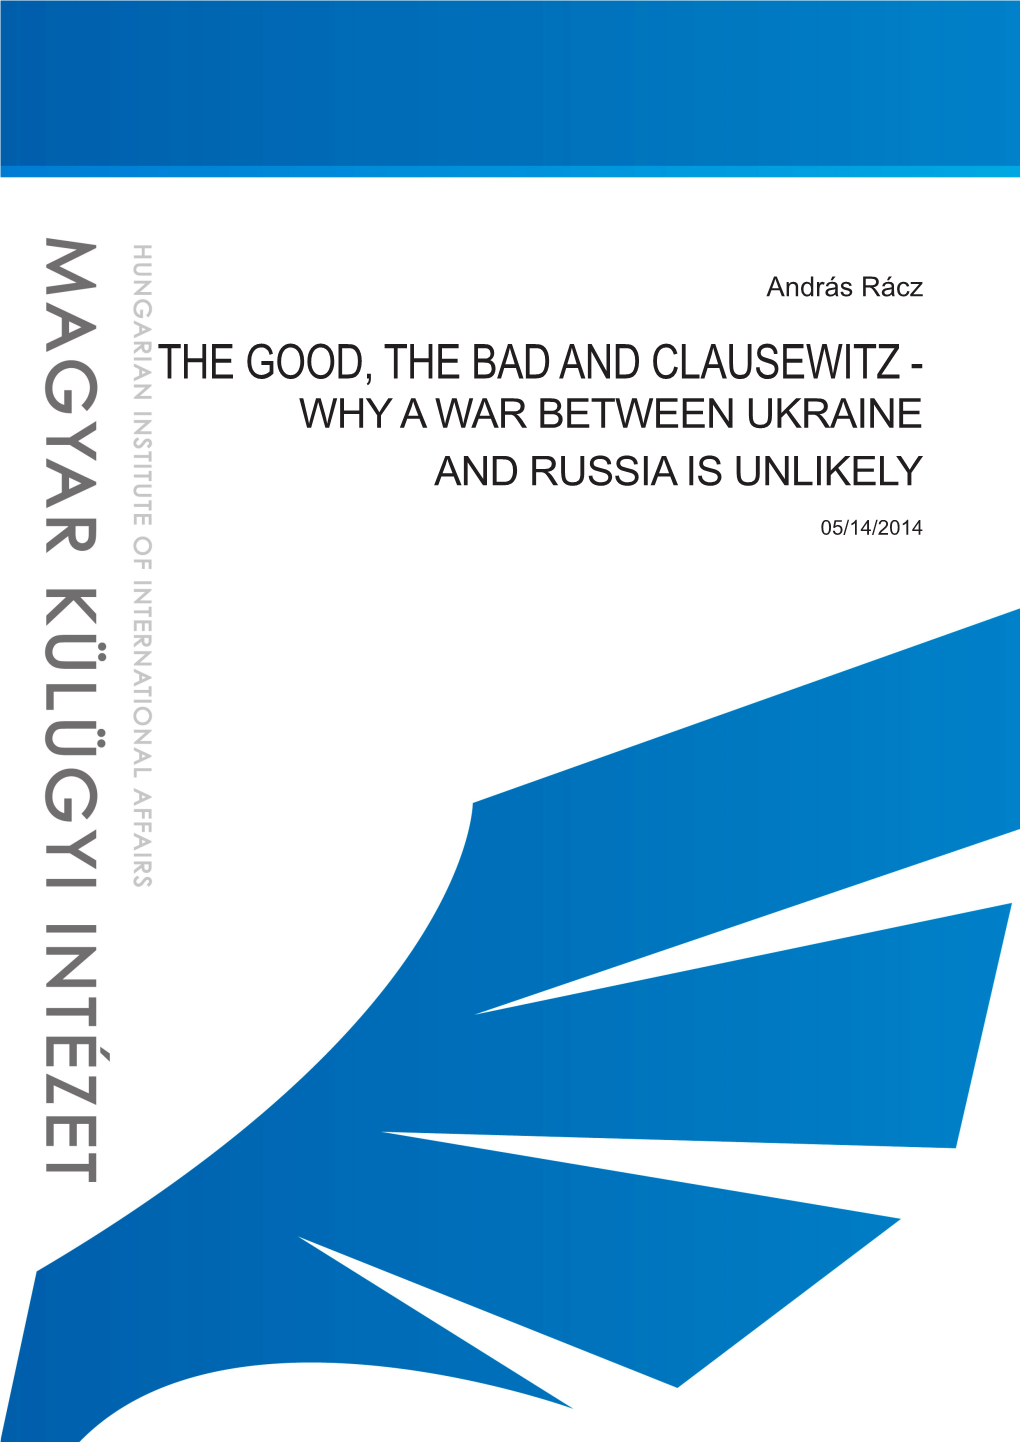 THE GOOD, the BAD and CLAUSEWITZ - WHY a WAR BETWEEN UKRAINE and RUSSIA IS UNLIKELY 05/14/2014 05/26/2014 the Good, the Bad and Clausewitz András Rácz